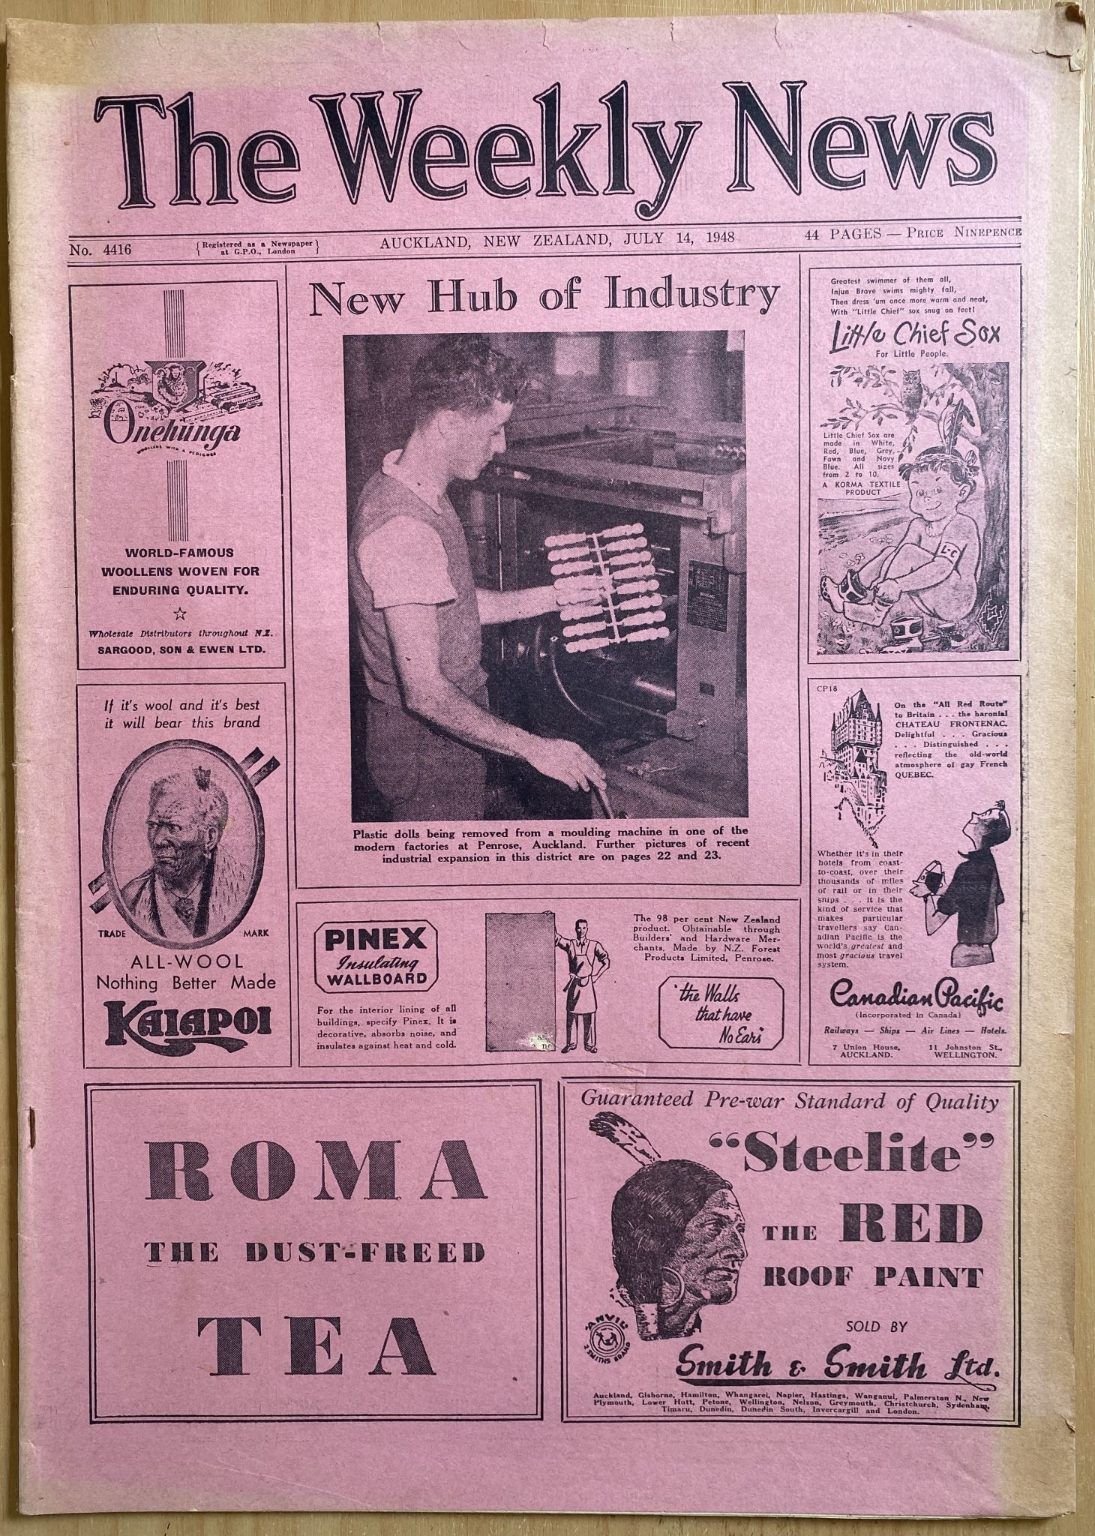 OLD NEWSPAPER: The Weekly News - No. 4416, 14 July 1948